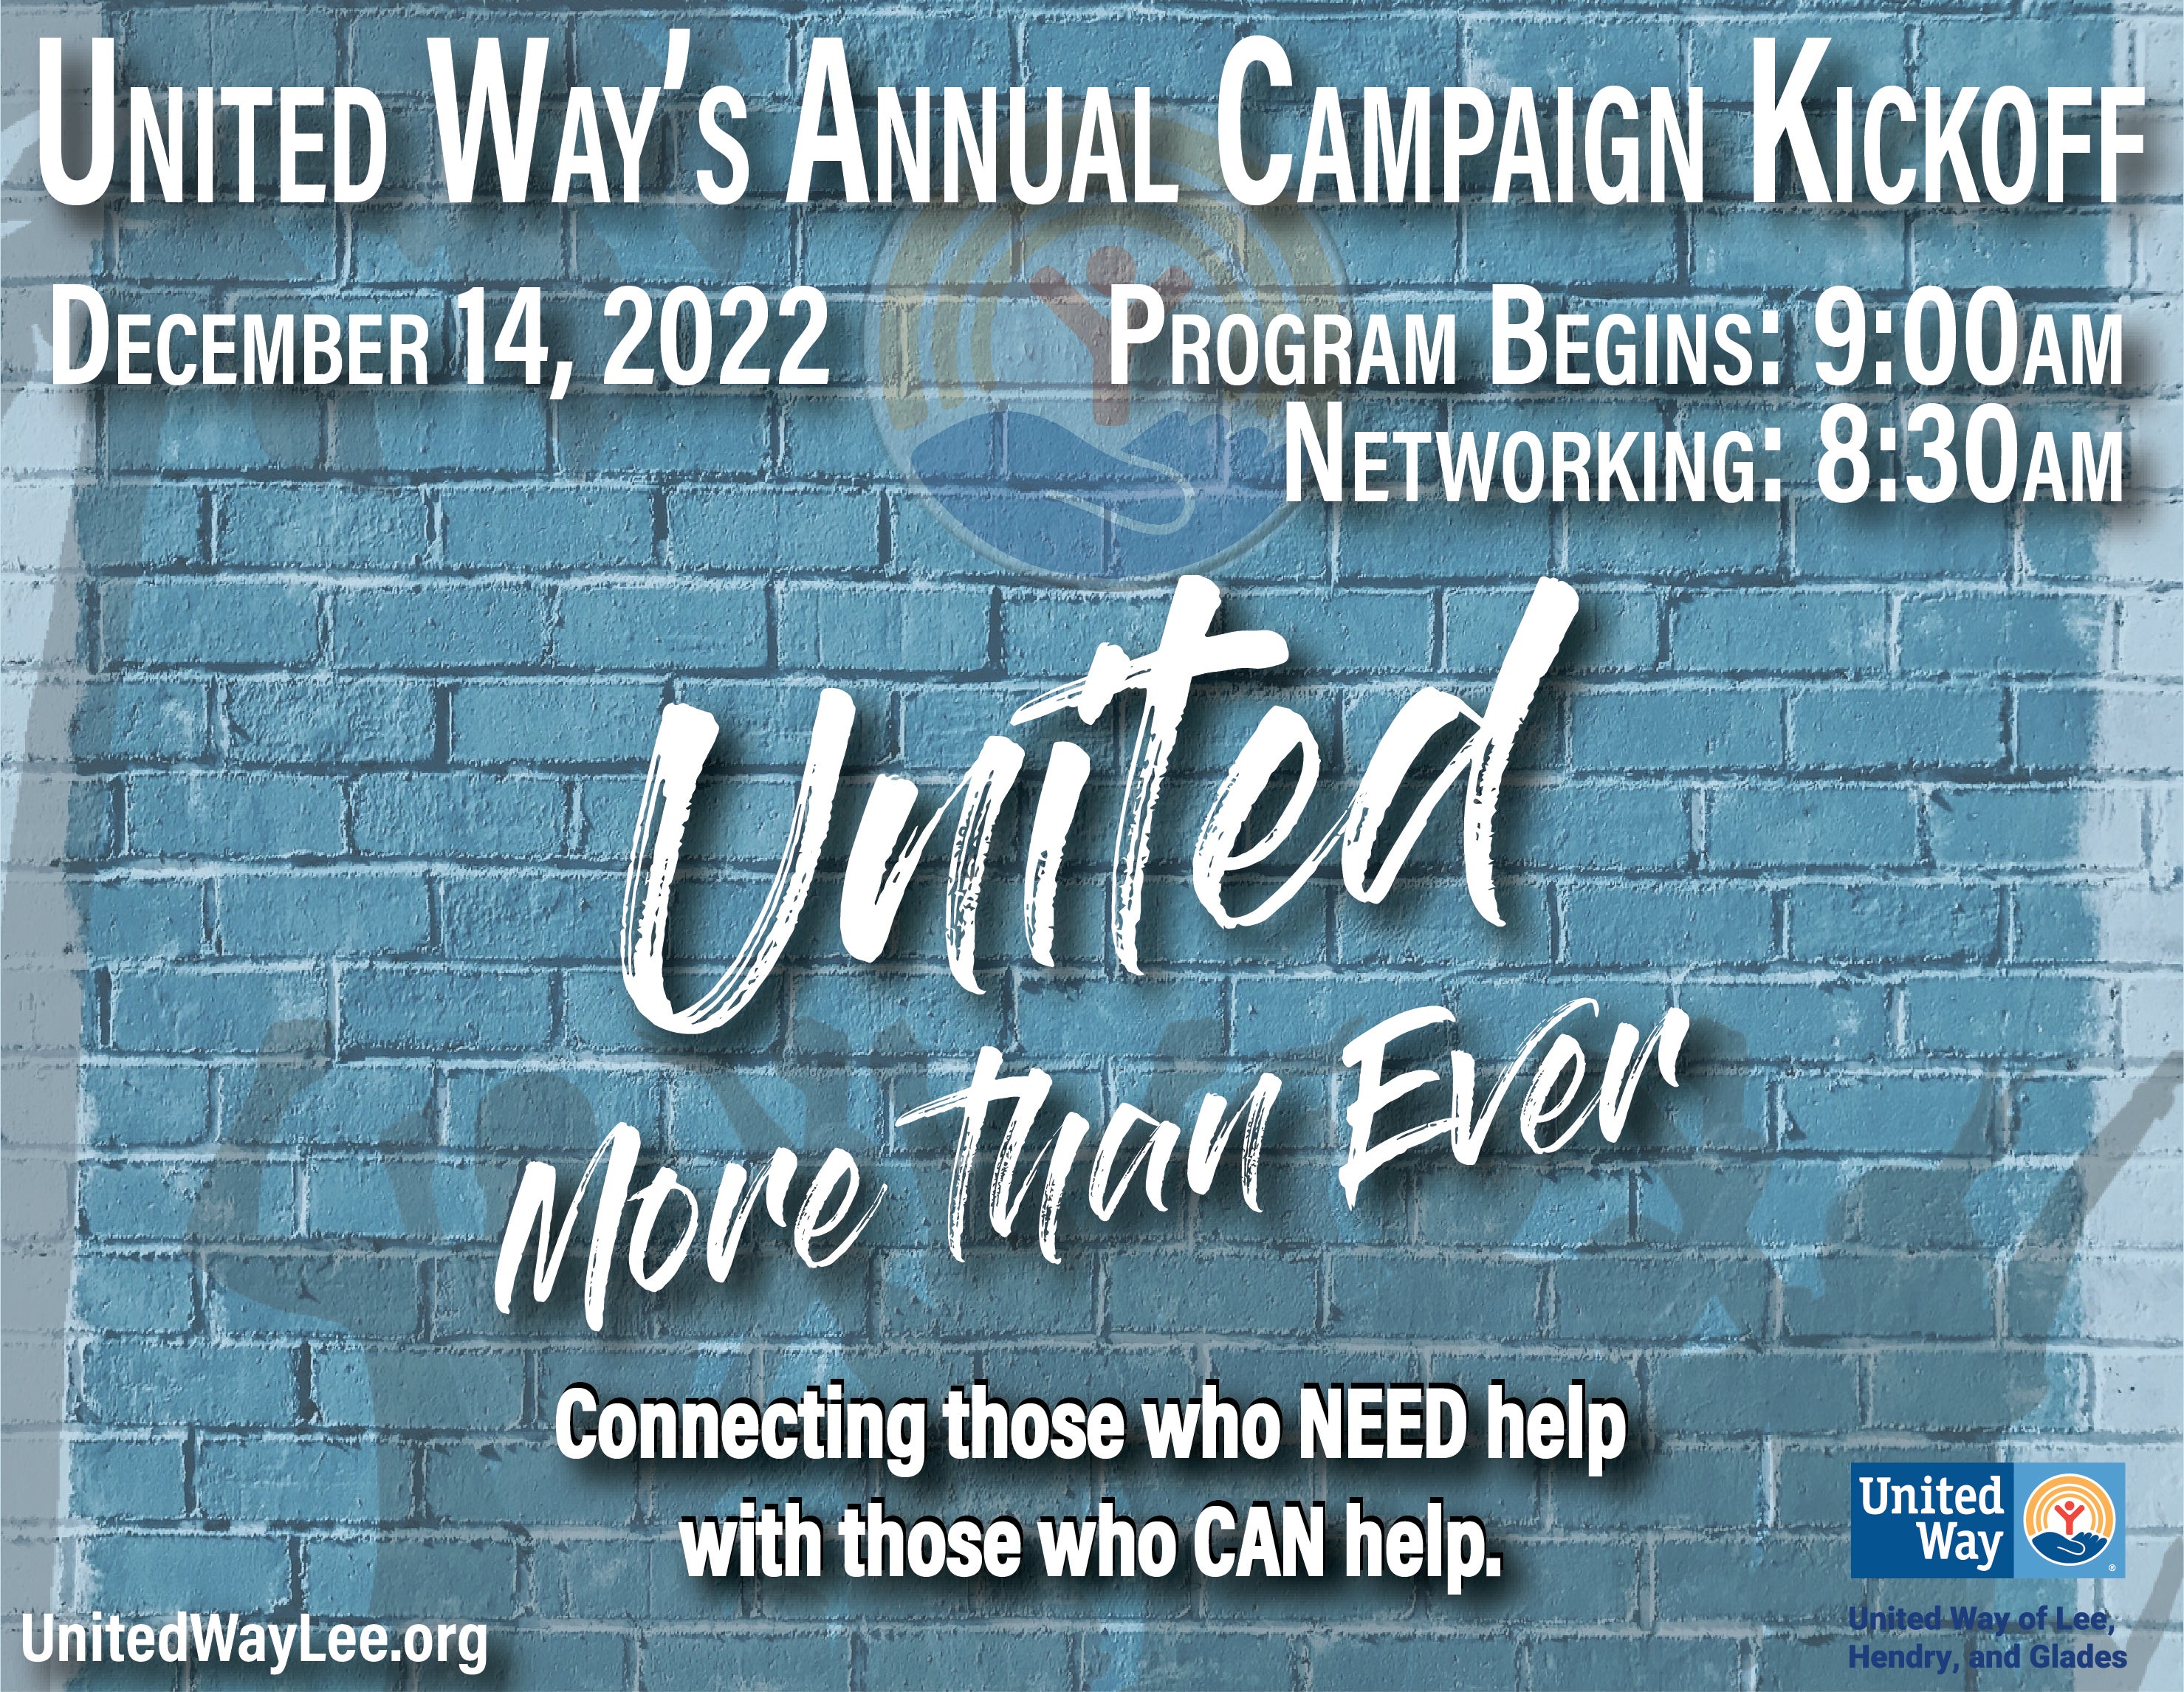 More Info for United Way Annual Campaign Kickoff